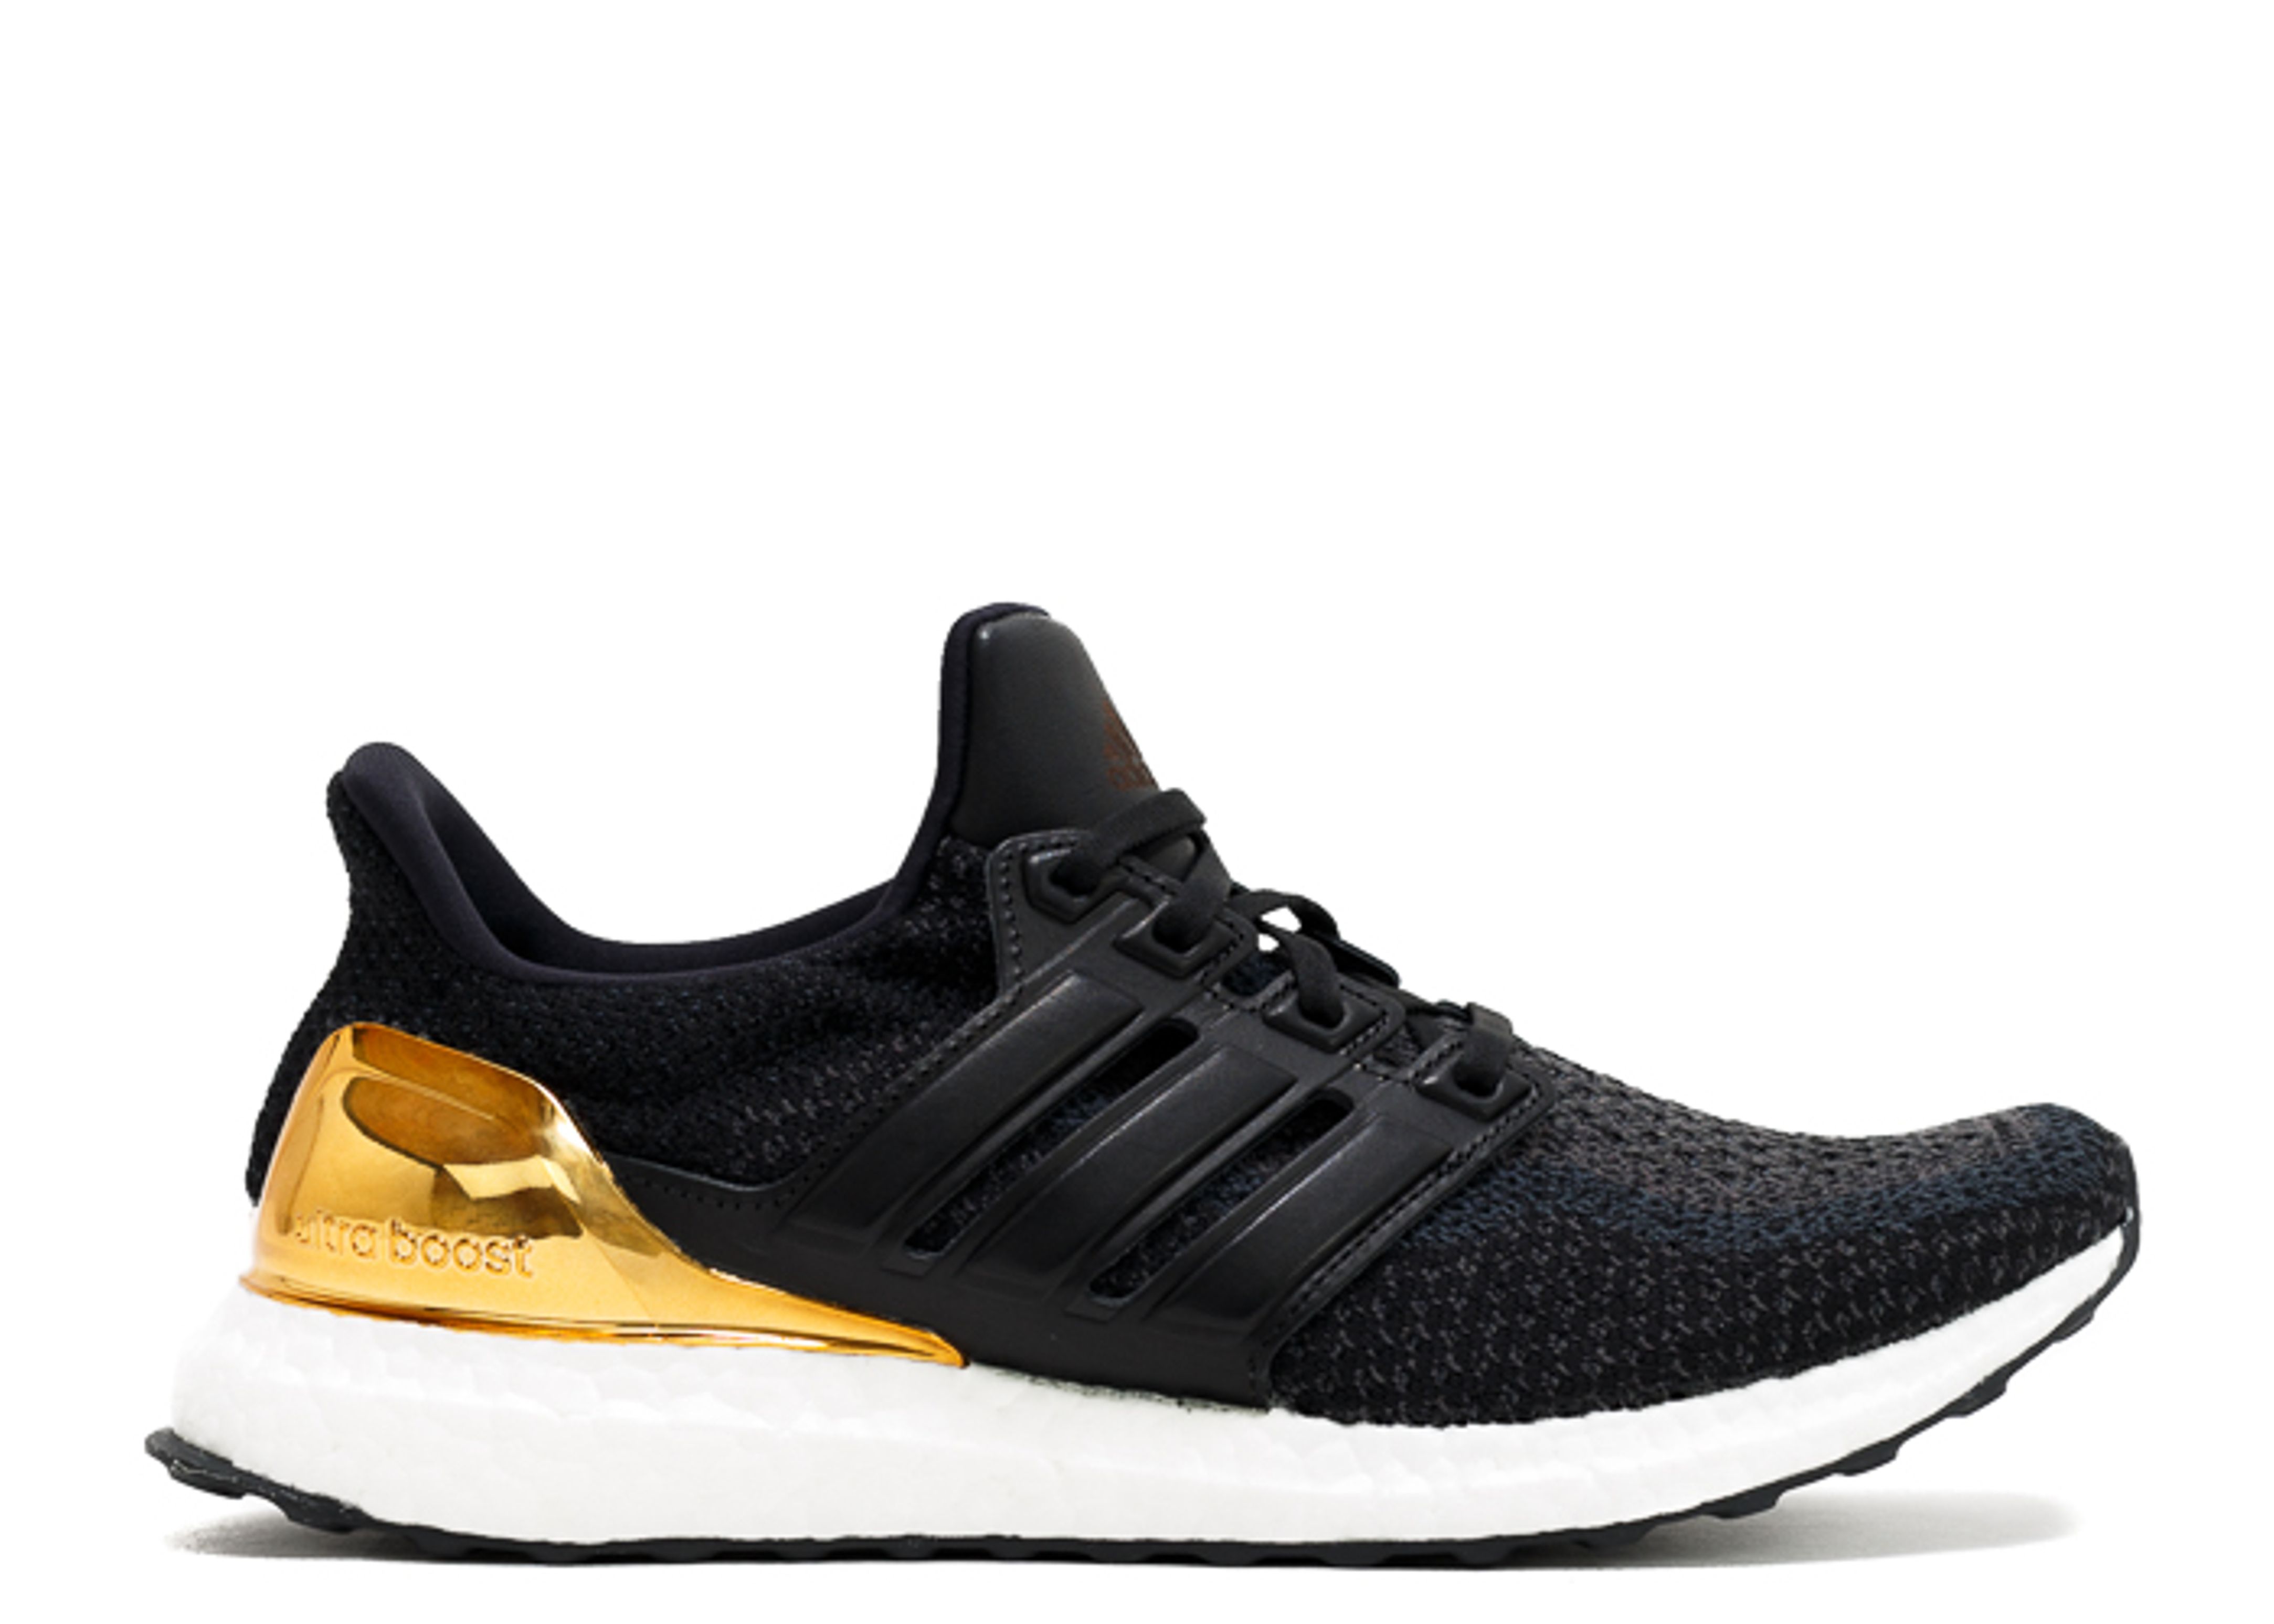 Кроссовки adidas Ultraboost 2.0 Limited 'Gold Medal', черный medal outstanding employees listed gold silver bronze children s competition champion company honor medal metal foil